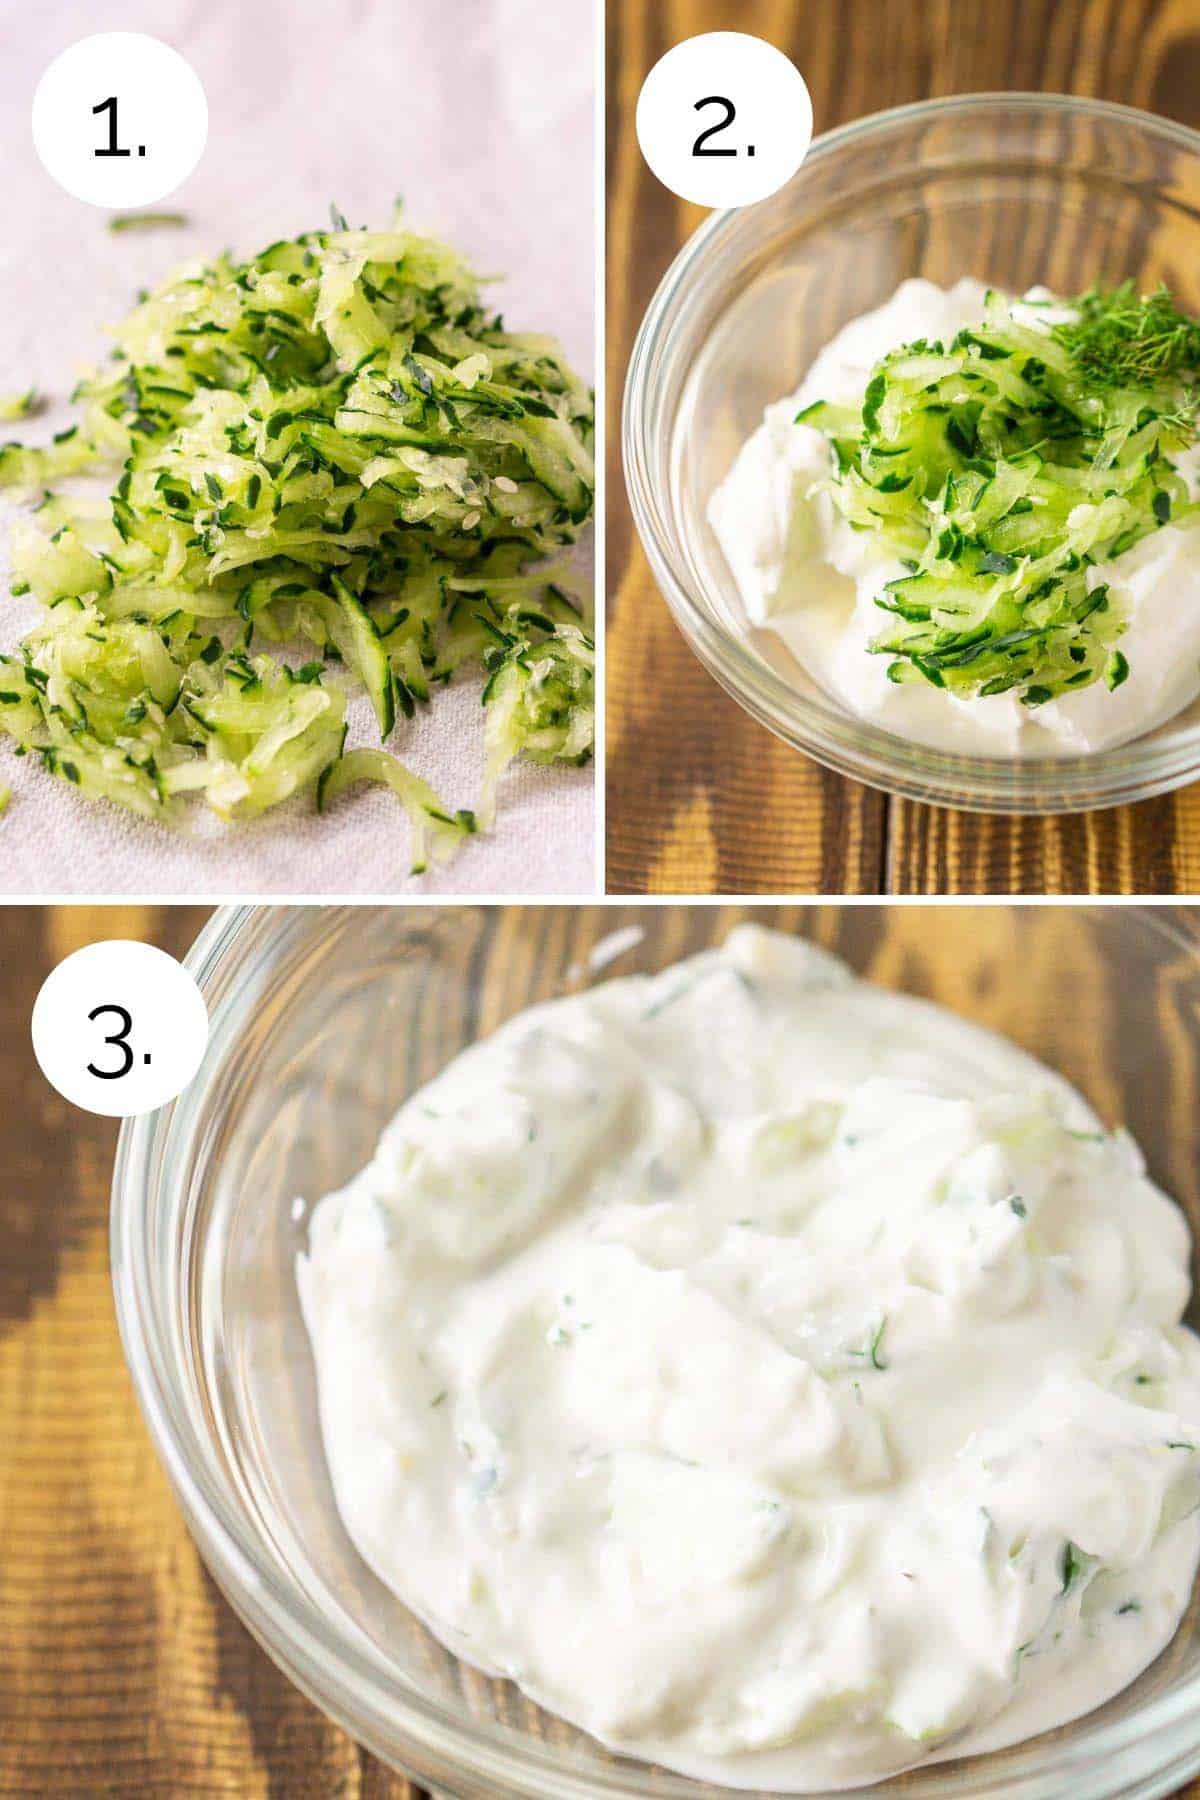 A photo collage showing the process of making the tzatziki sauce.